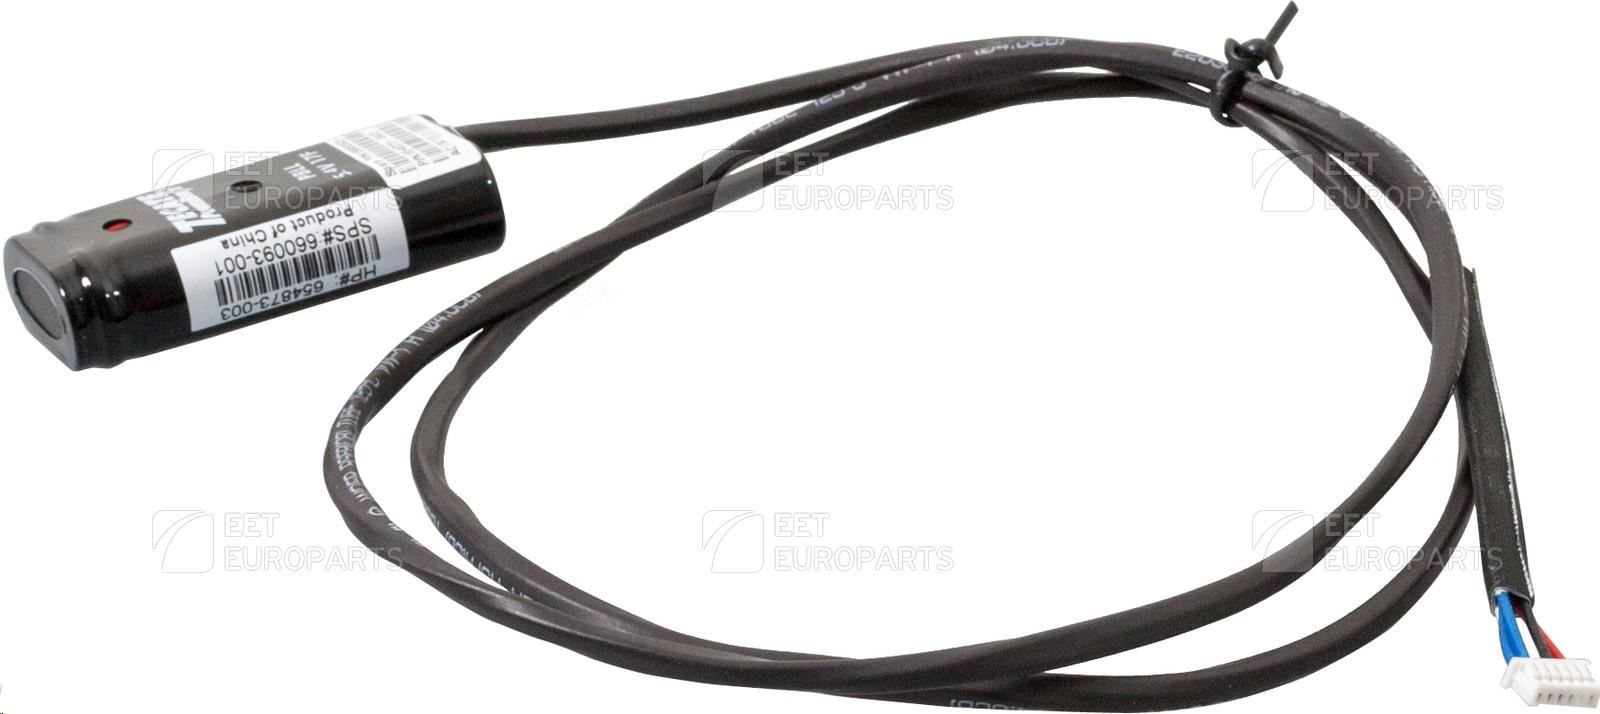 HPE FL capacitor cable 36 Inch 660093-001 5711045485626 (Battery P420I, P420)0 